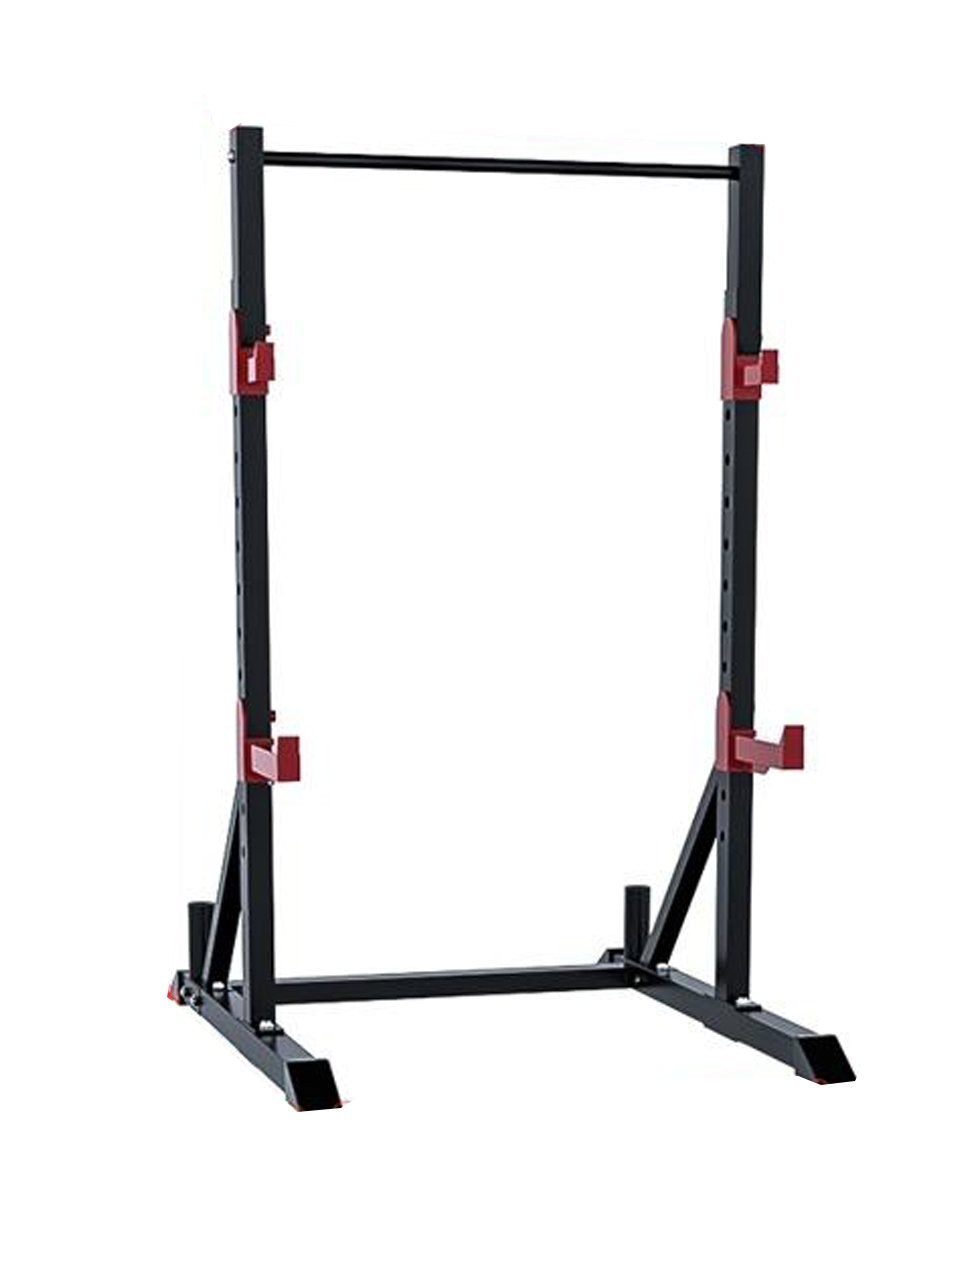 Combo Deal | 1441 Fitness Squat Rack MDL65 +7 ft Barbell with 80 Kg tri Grip Plate Set + Adjustable Bench A8007